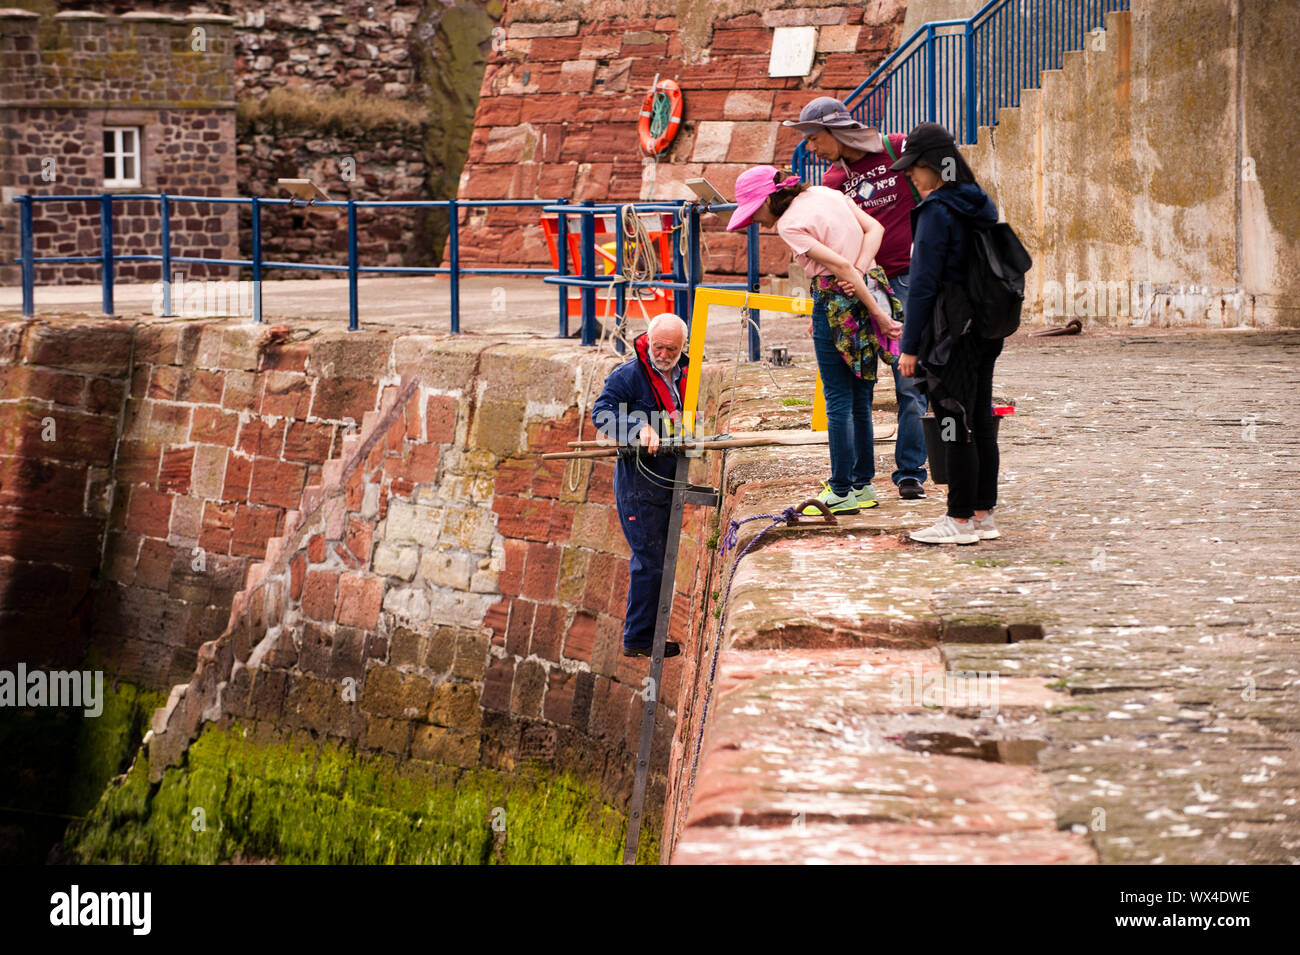 A group of tourists observe an old fisherman getting to his boat. Dunbar is a town located in the south-east of Scotland. Stock Photo